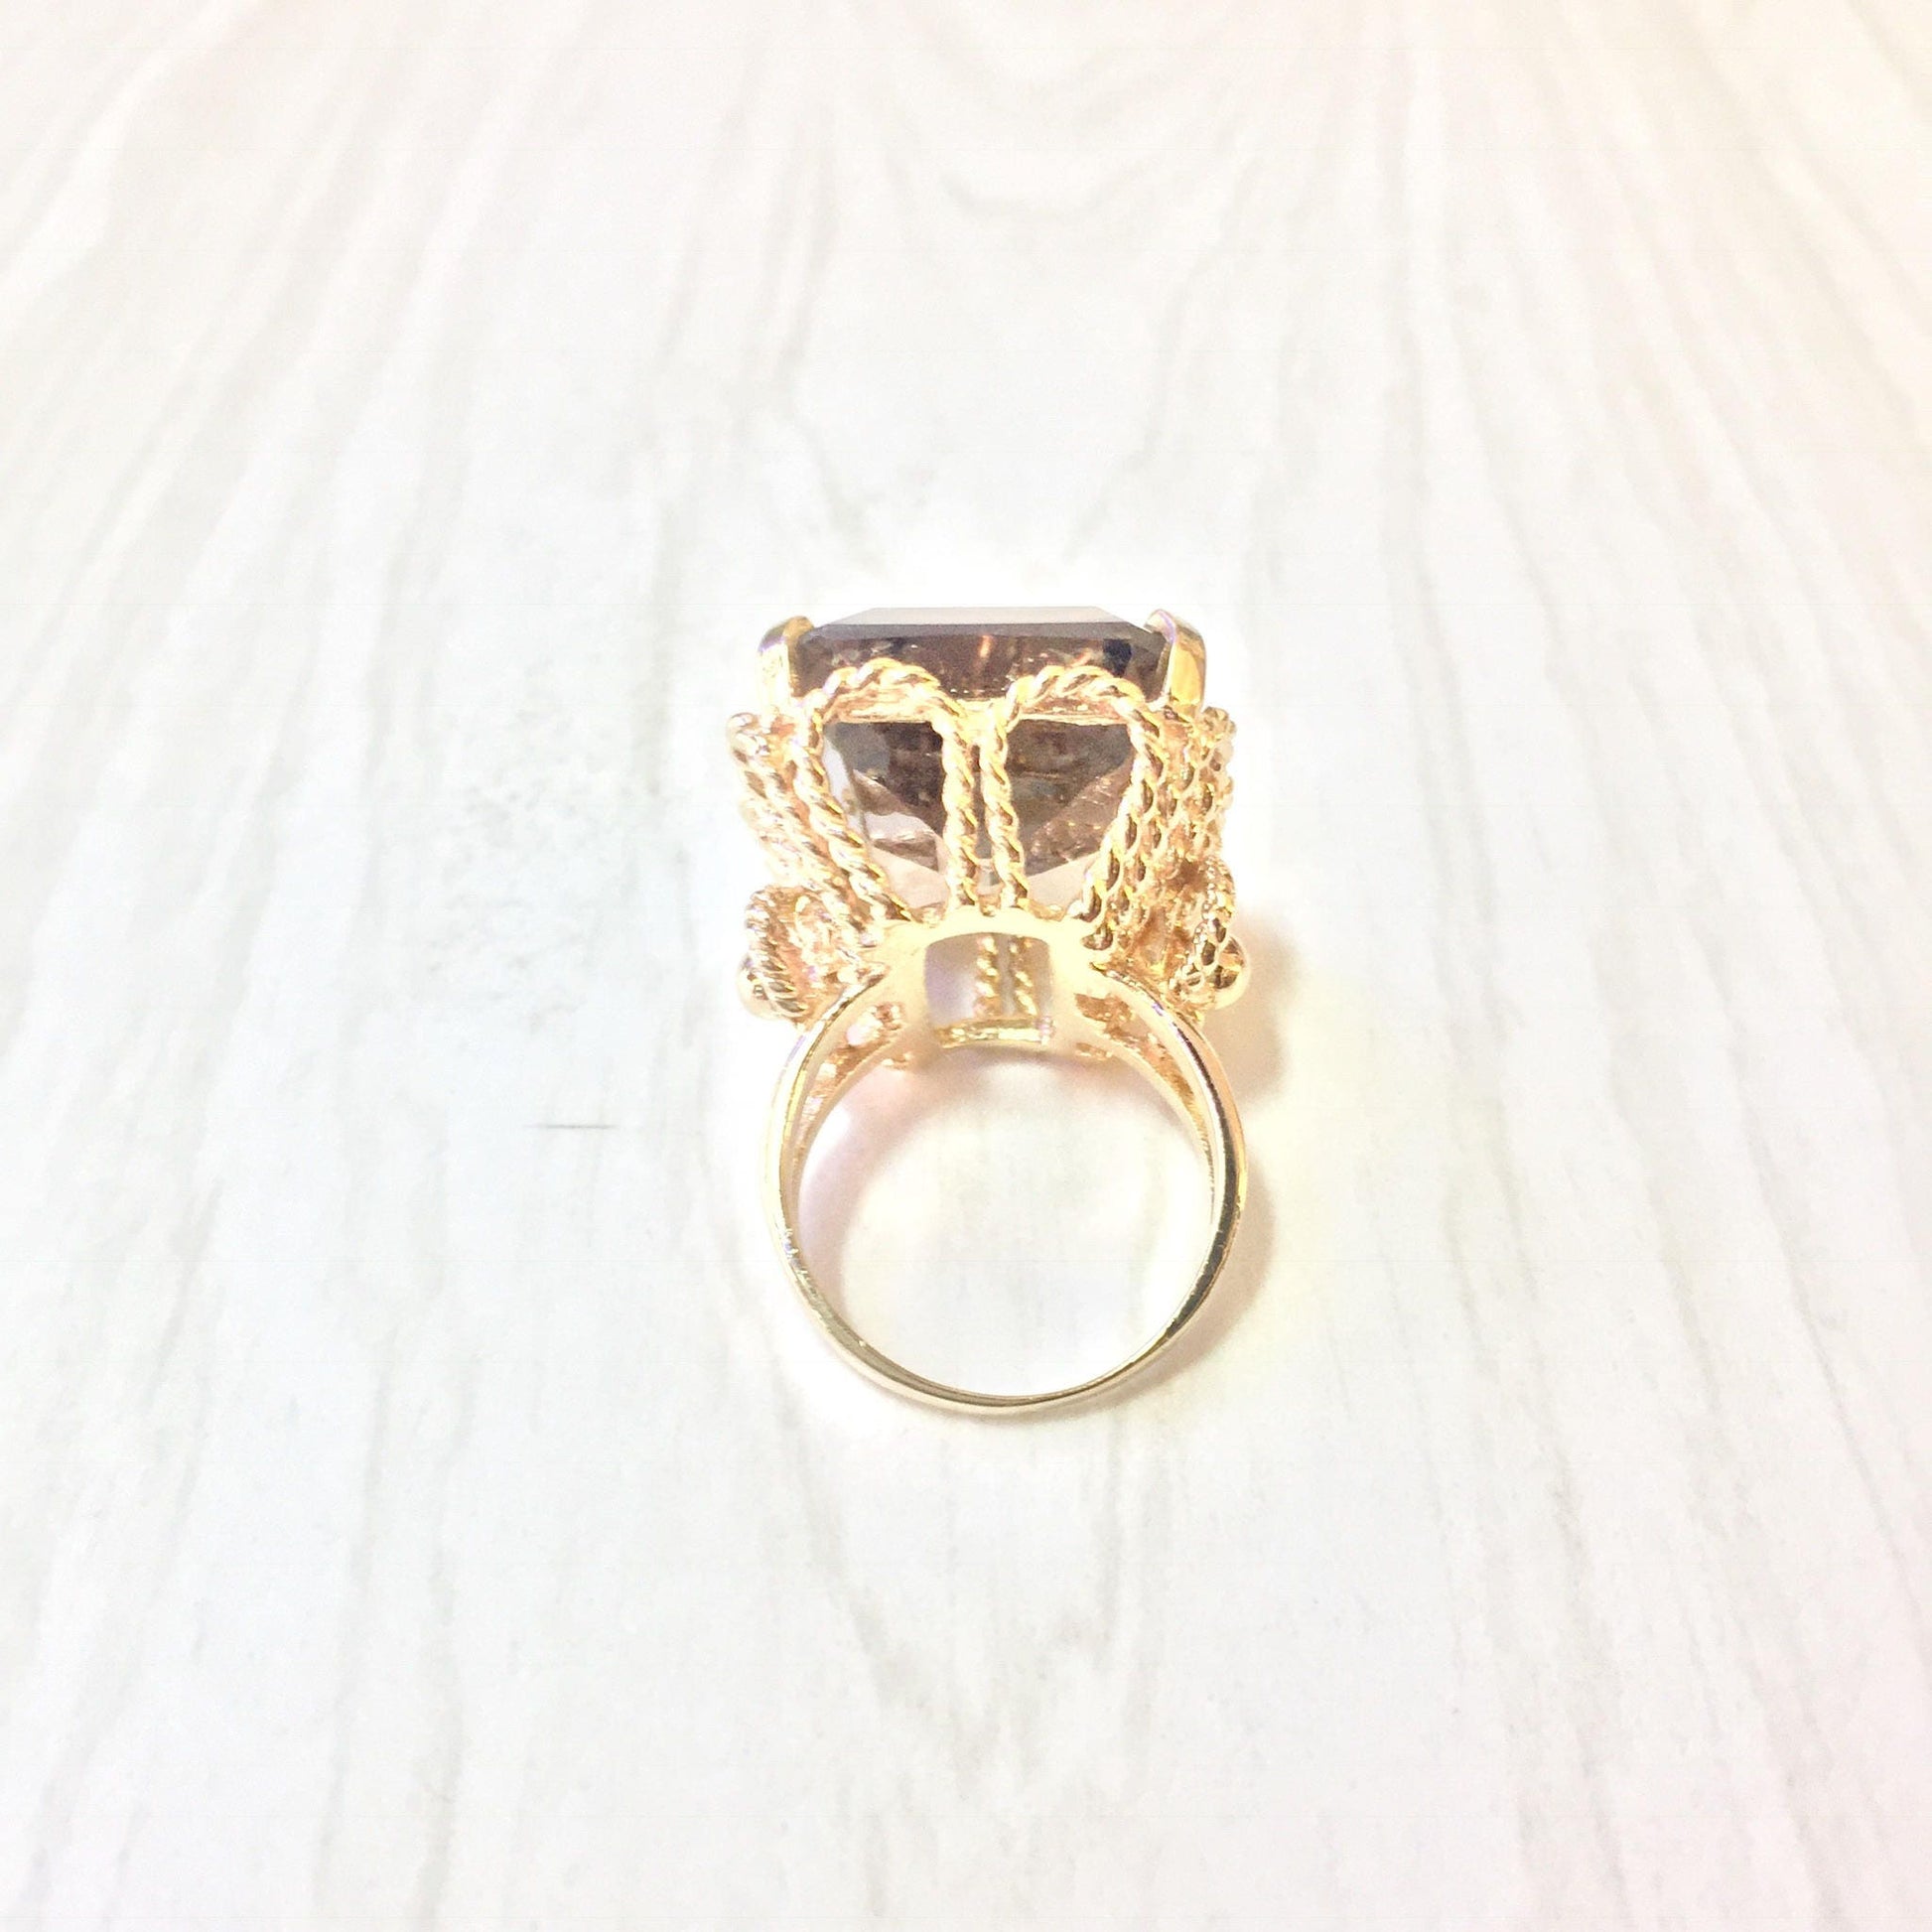 14K yellow gold smoky quartz cocktail ring with ornate setting and emerald cut center stone, statement jewelry piece